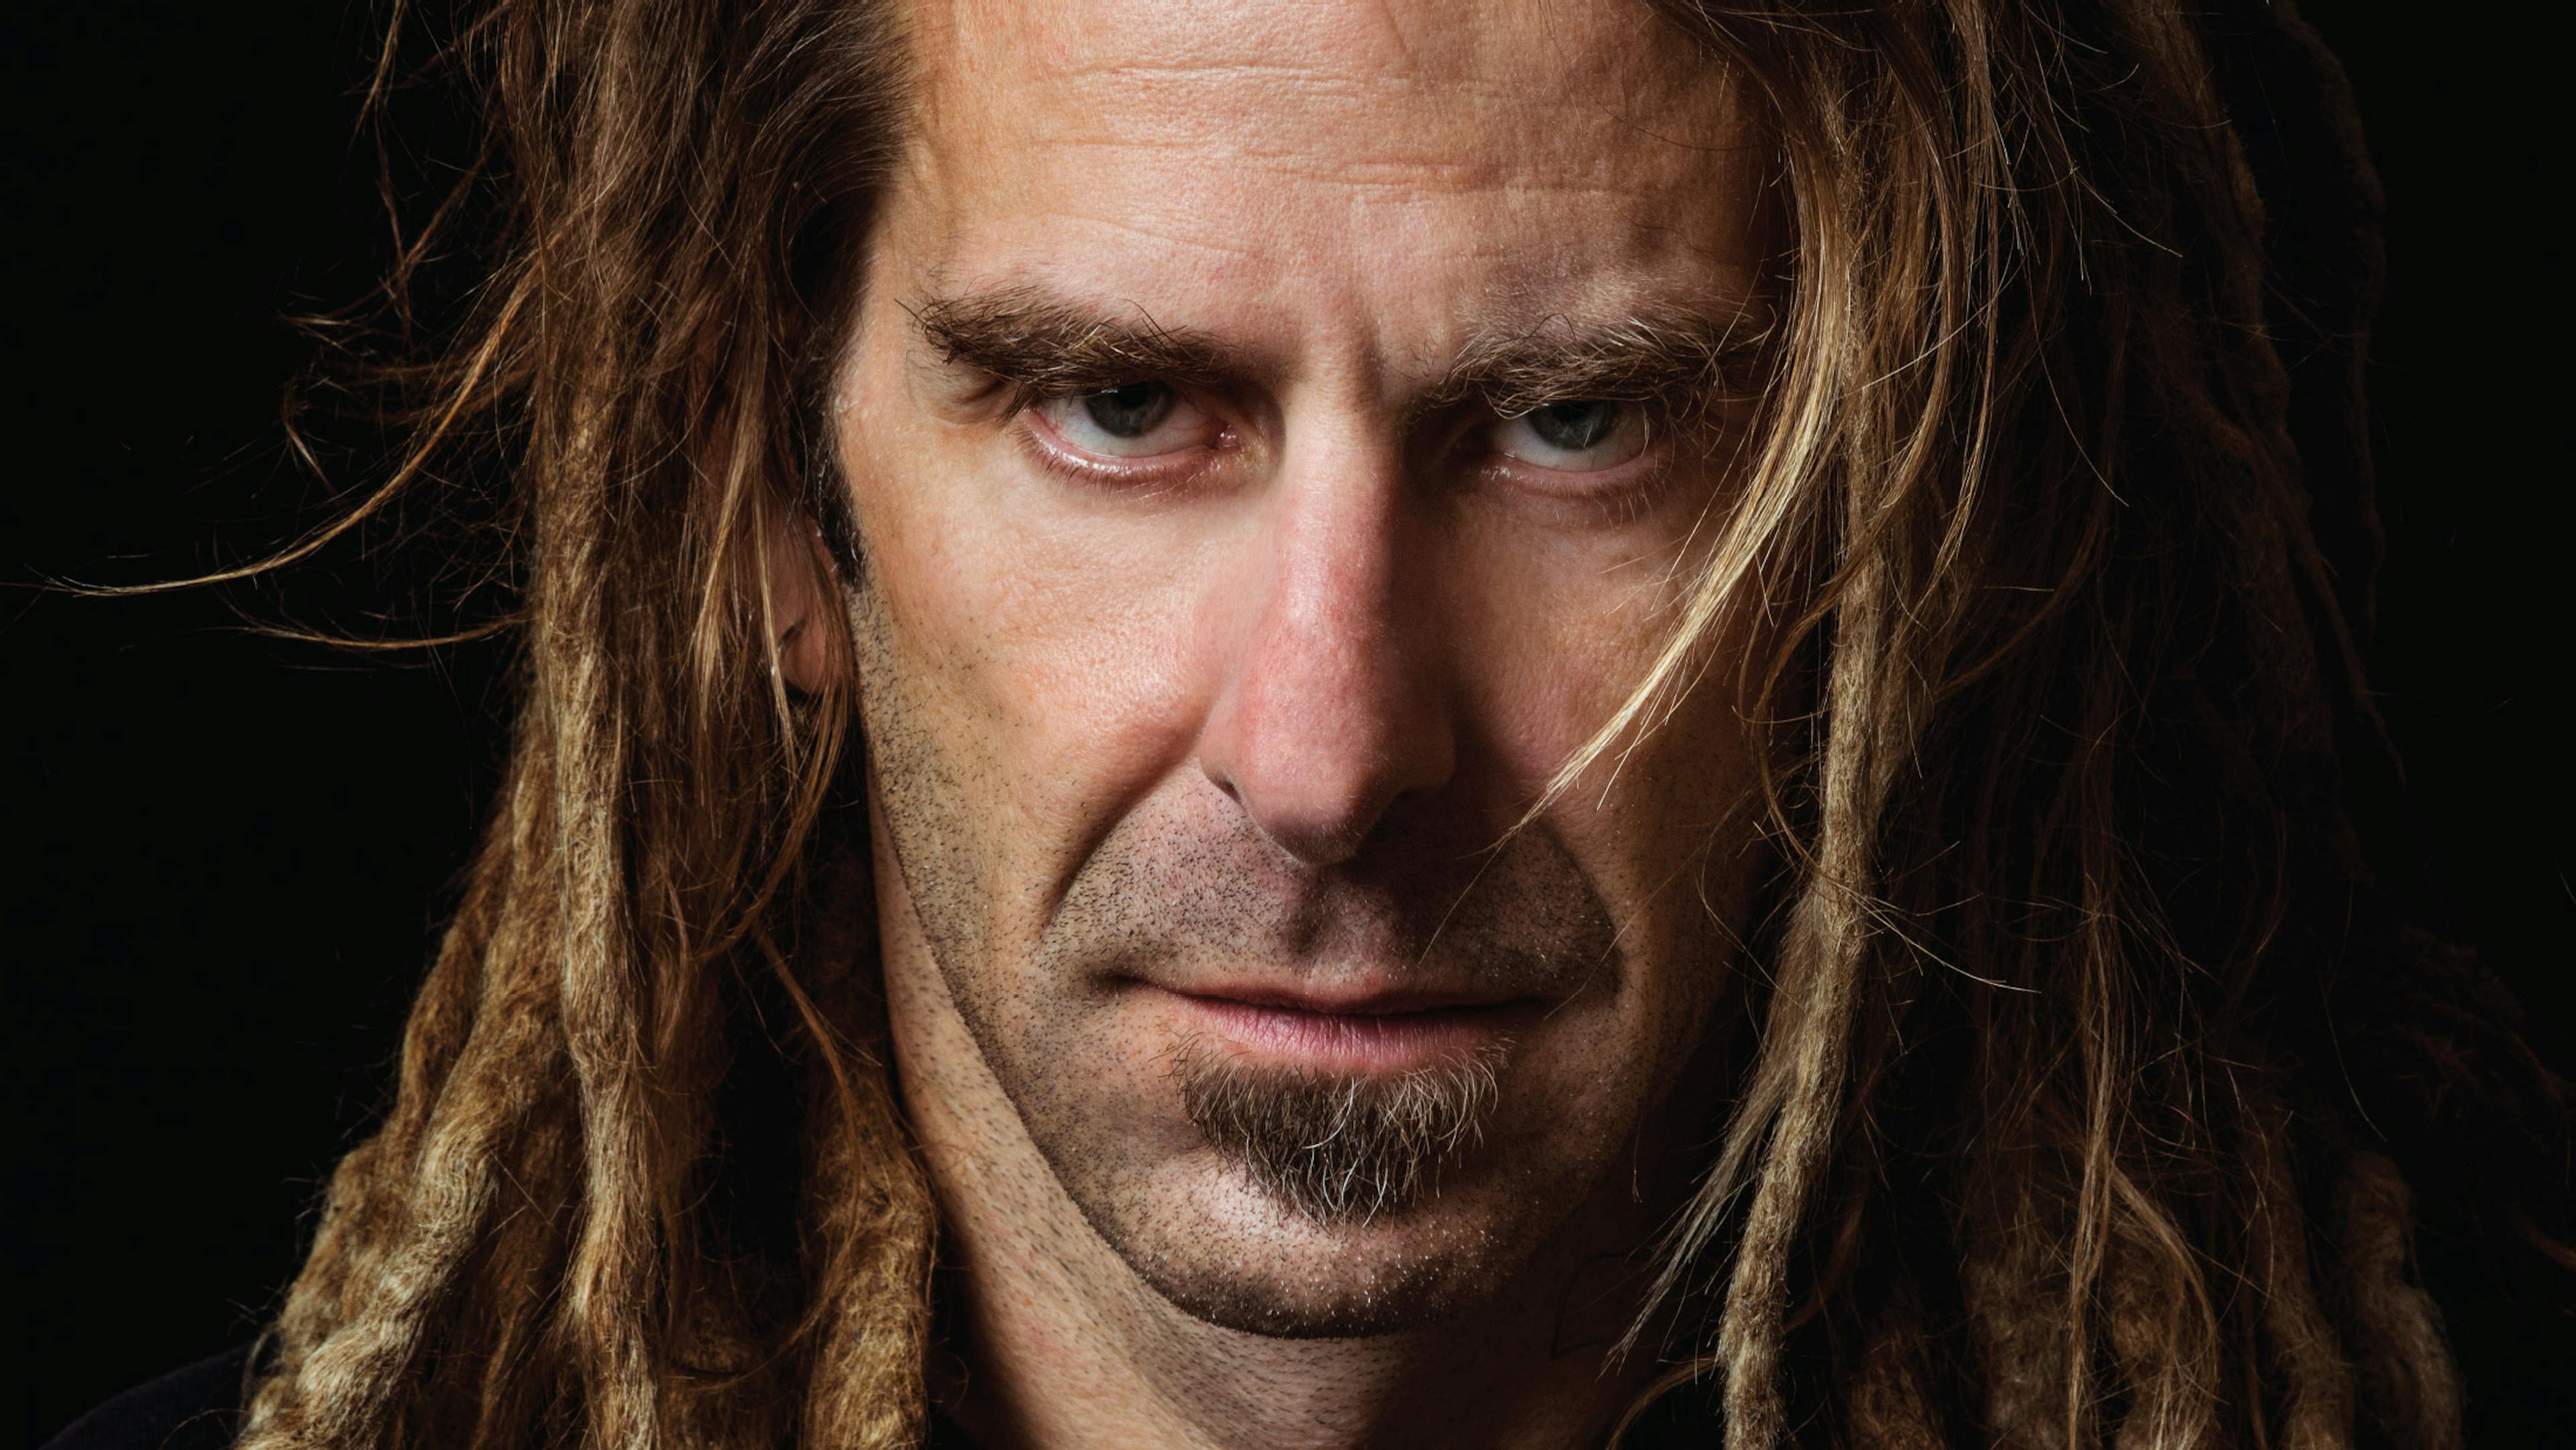 Randy Blythe: "If Things Go To Shit, I'm Ready To Live In The Woods"